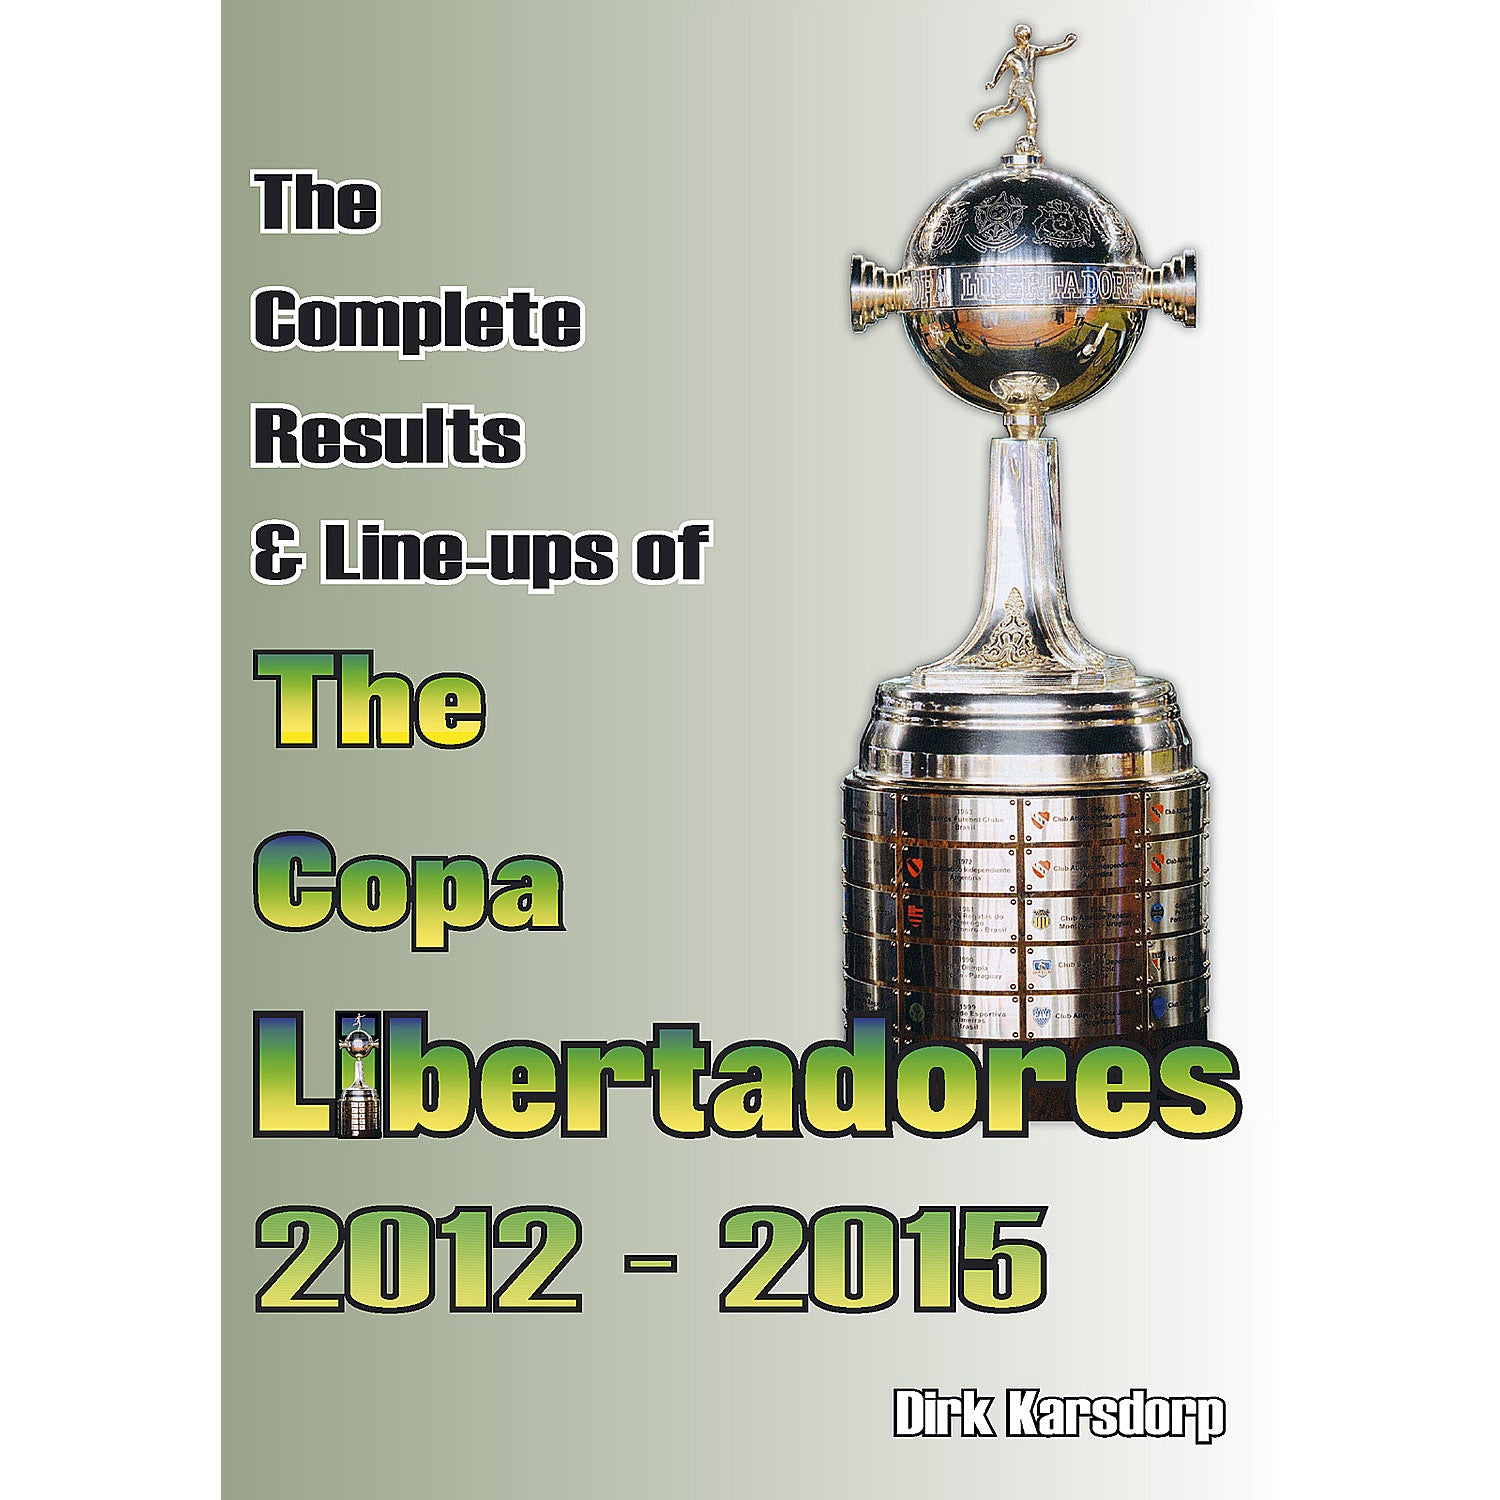 The Complete Results & Line-ups of the Copa Libertadores 2012-2015